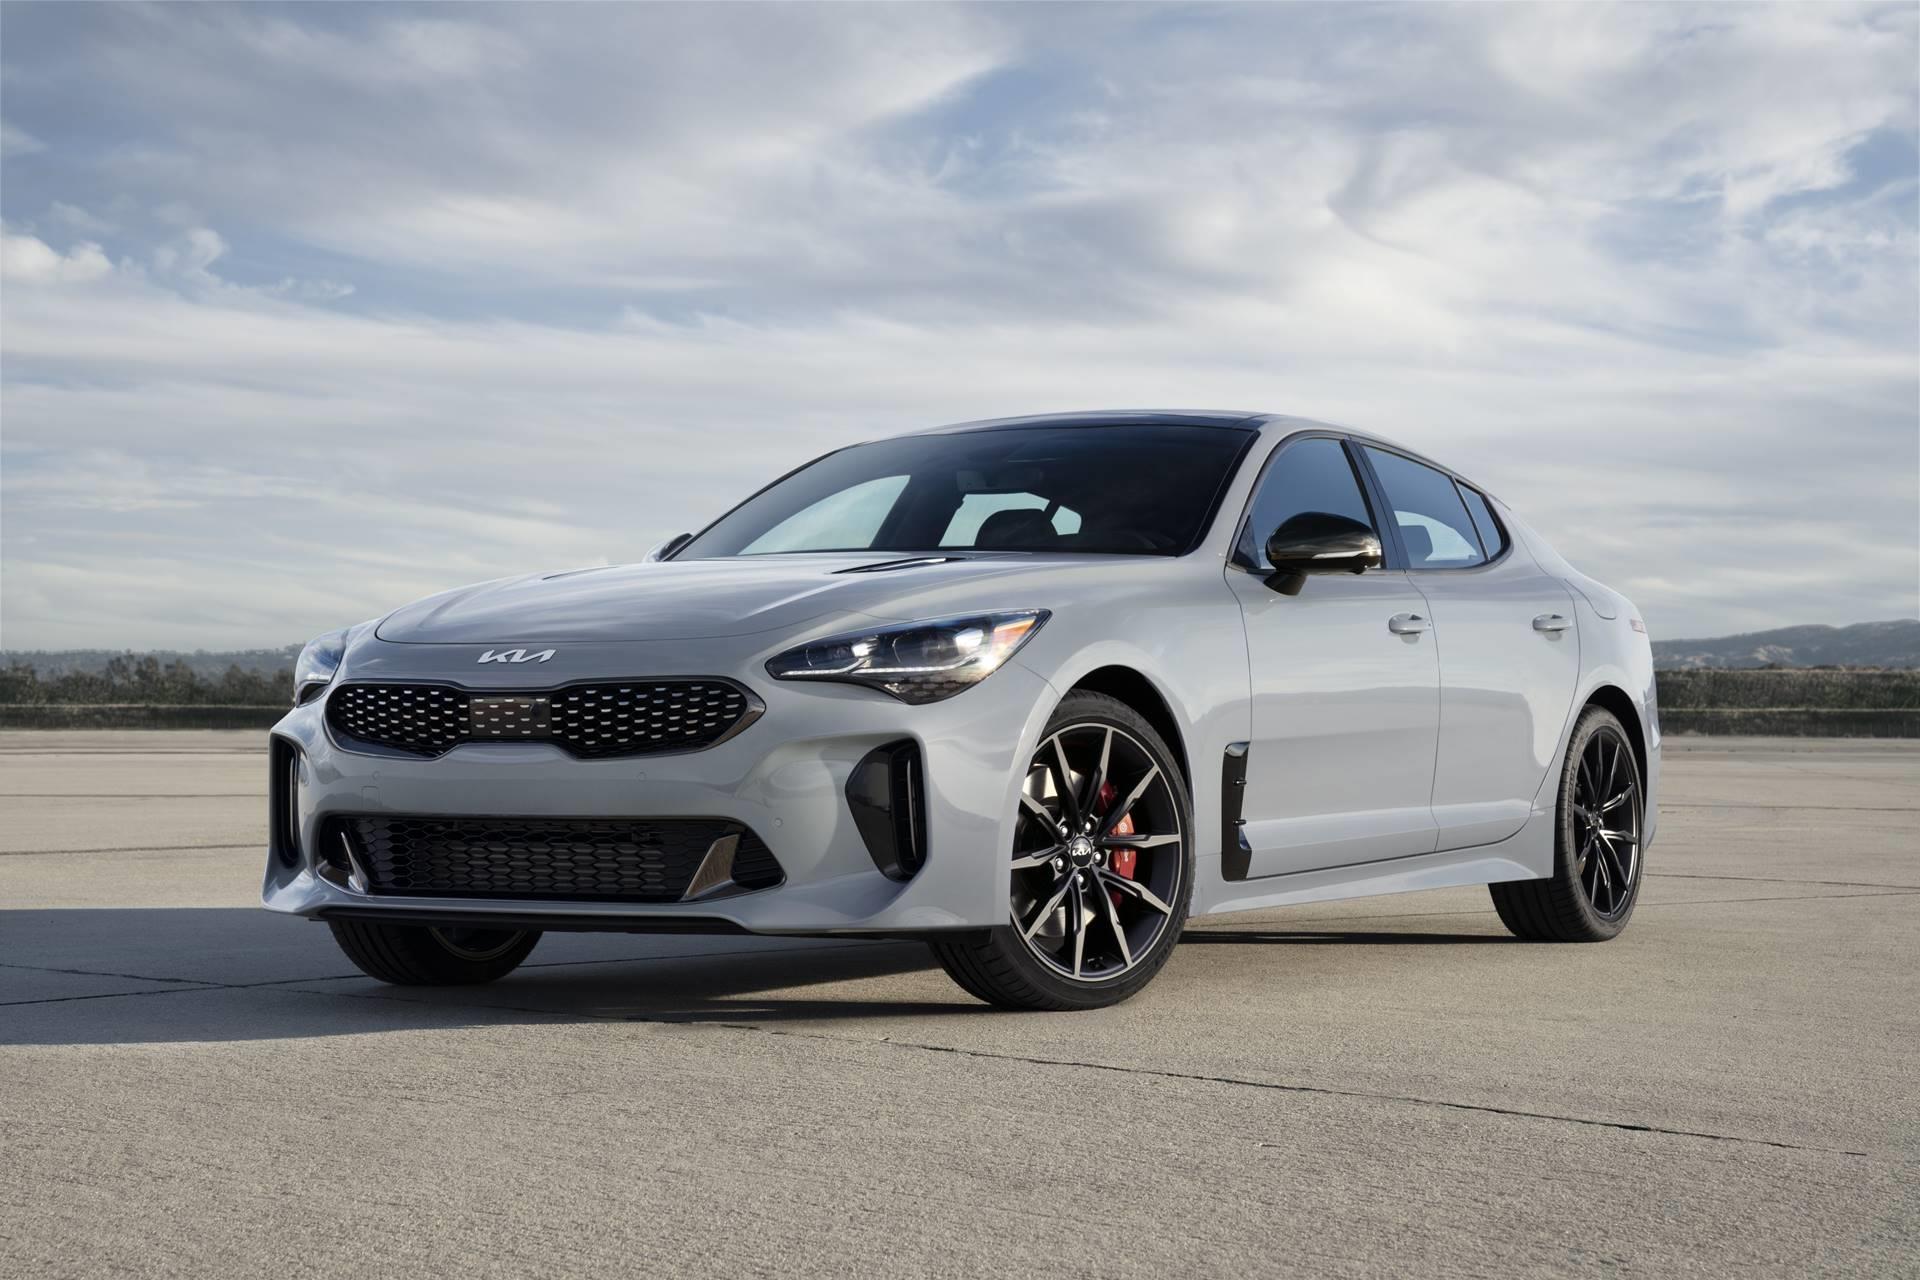 2022 Kia Stinger Scorpion Special Edition Wallpaper and Image Gallery